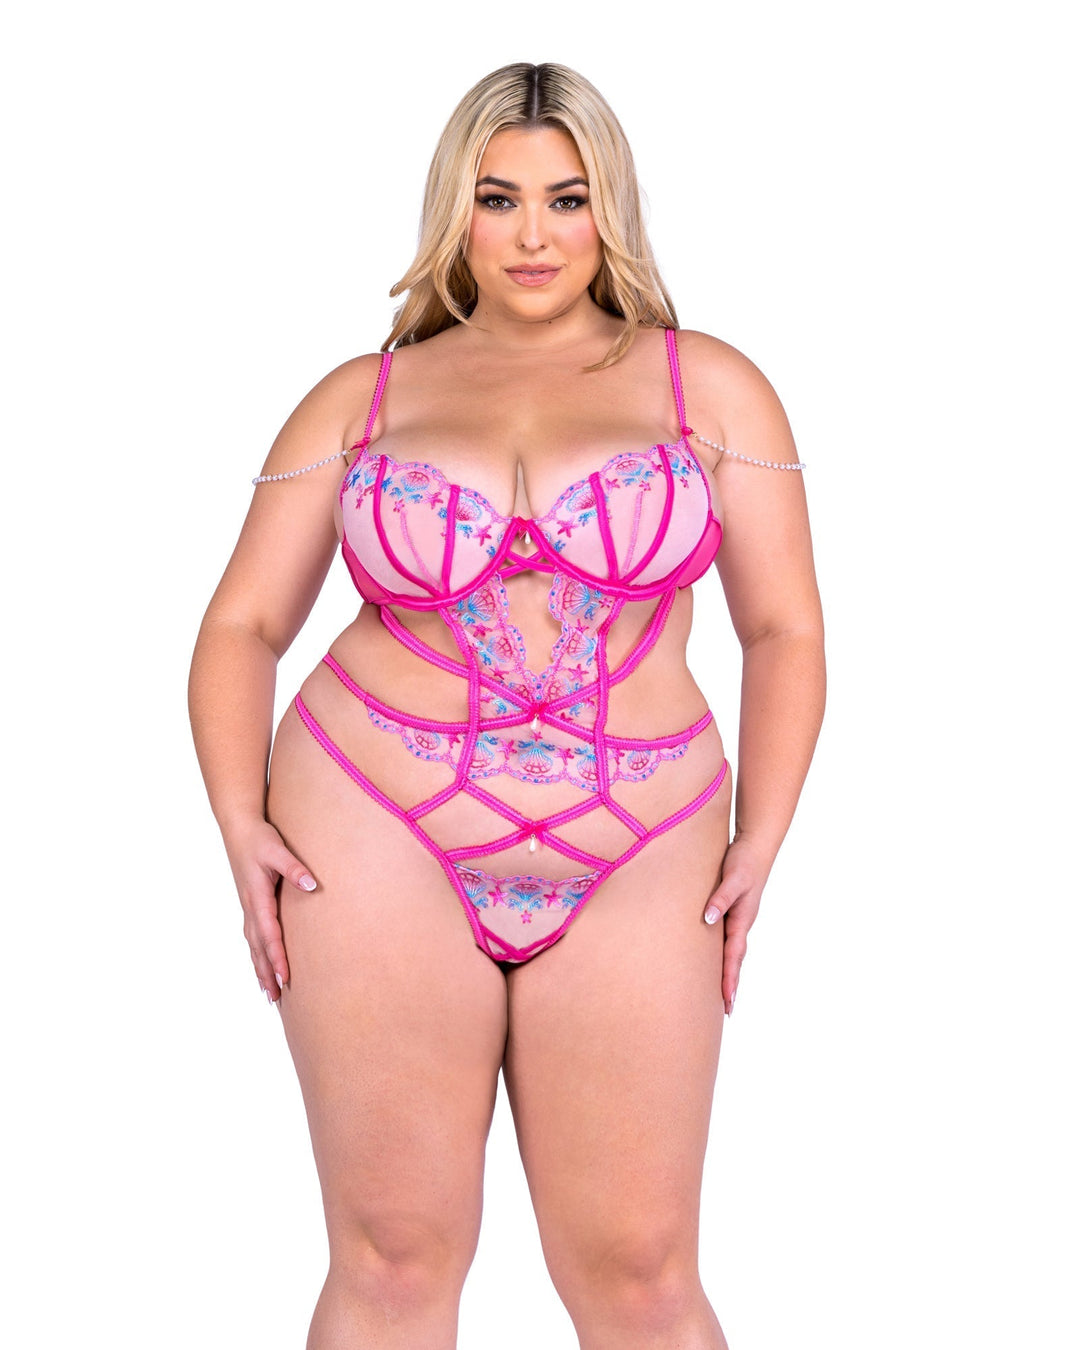 Queen Sultry Siren Rivage Satin Lace Pearl Teddy Pink-Roma Confidential-Rebel Romance